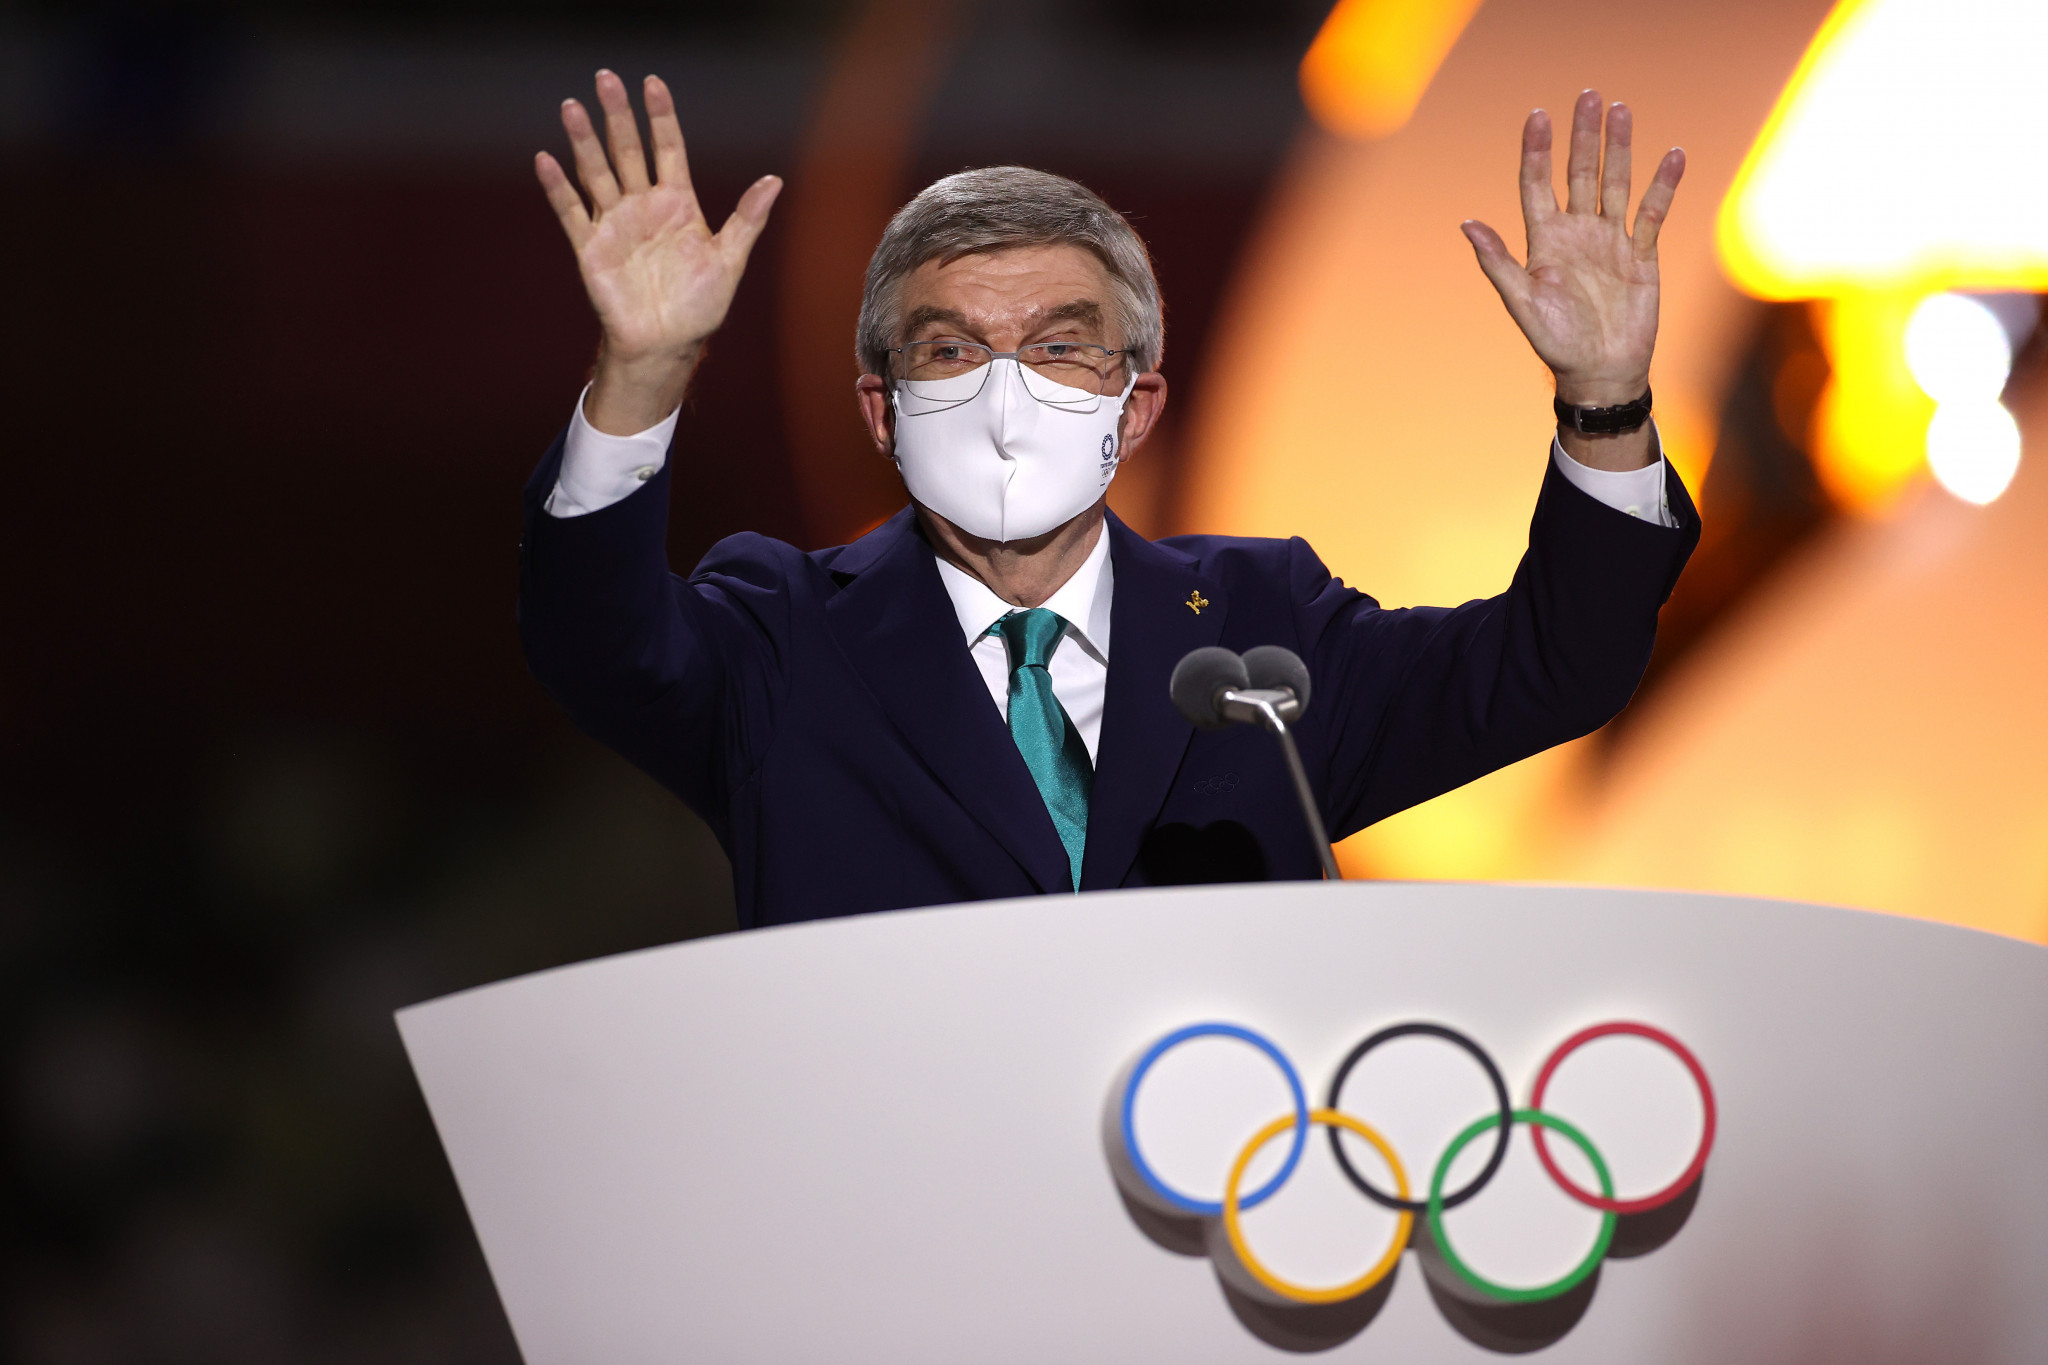 The International Olympic Committee, led by President Thomas Bach, is firmly against a biennial FIFA World Cup fearing it would marginalise other sports ©Getty Images